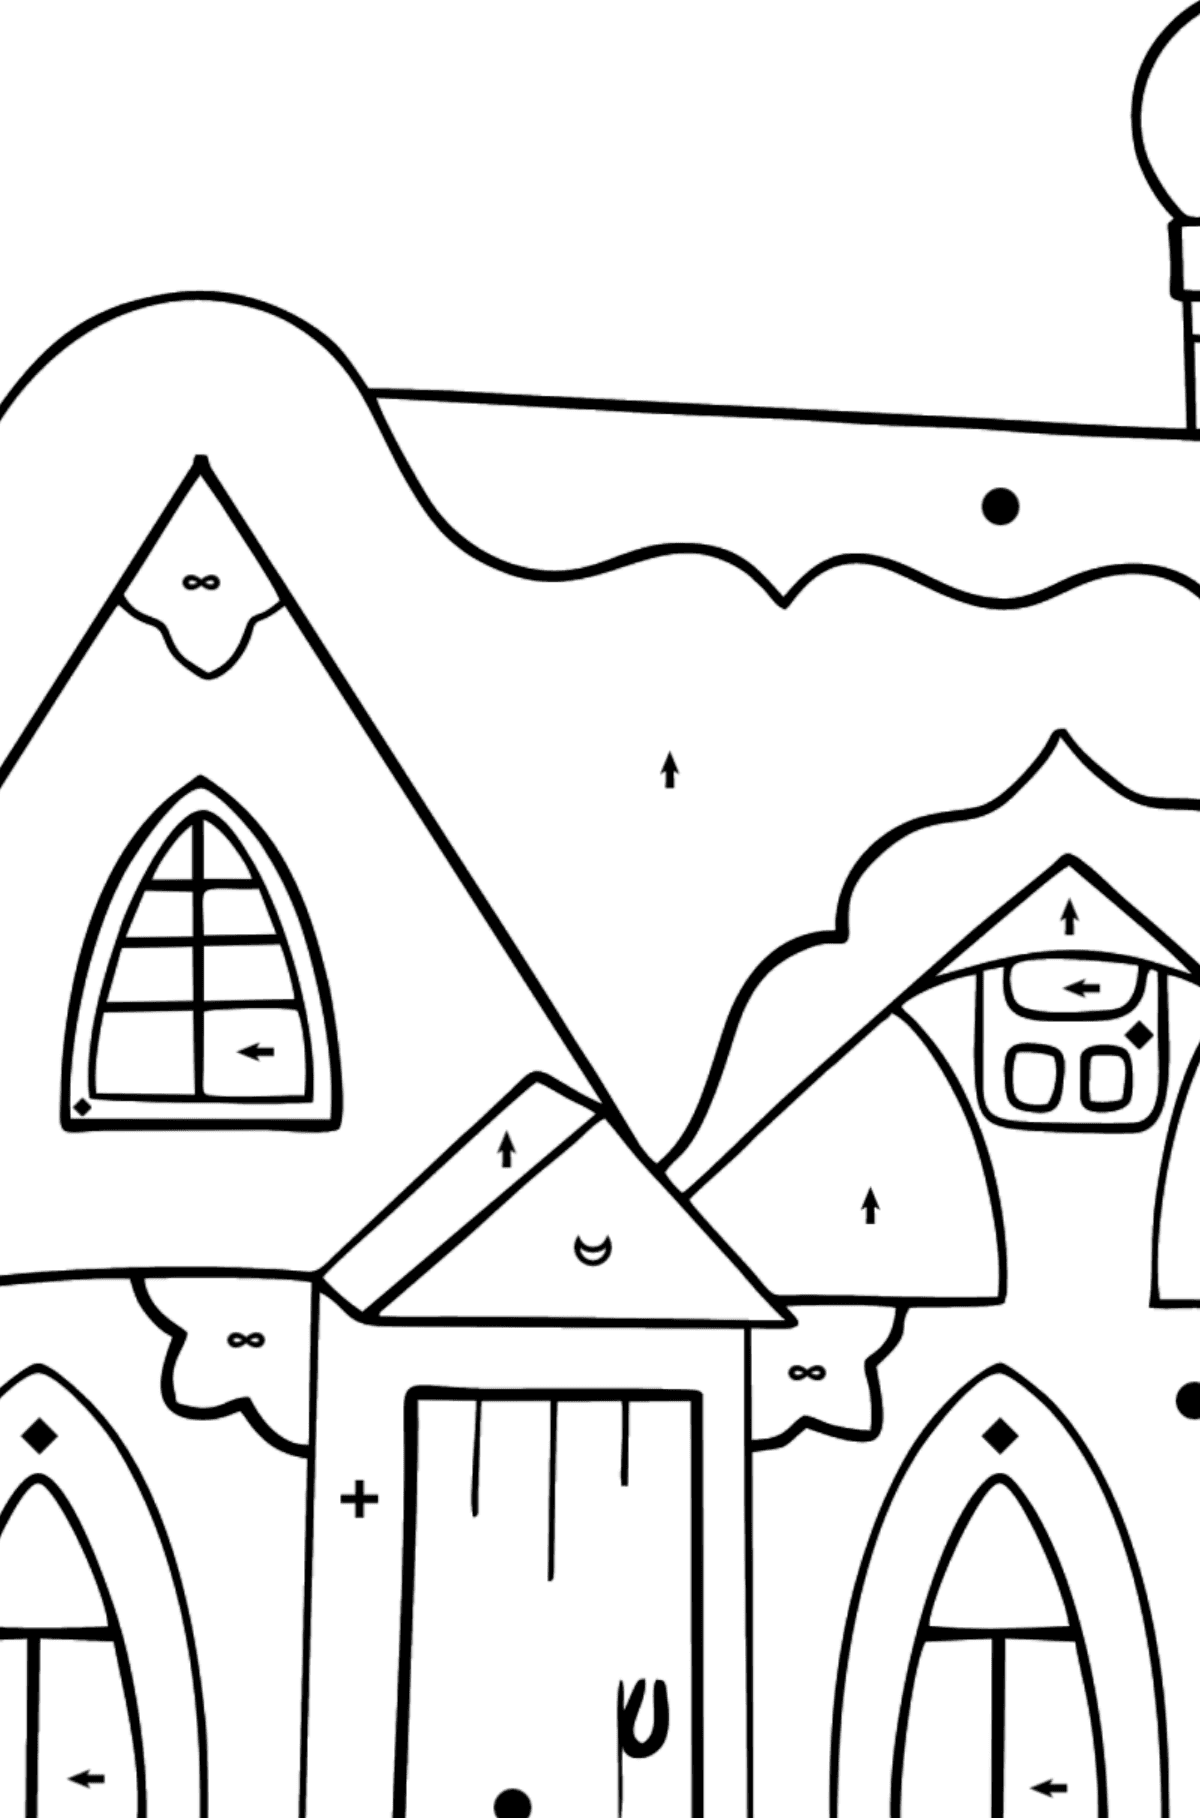 Coloring Page - A Fairytale House - Coloring by Symbols for Kids